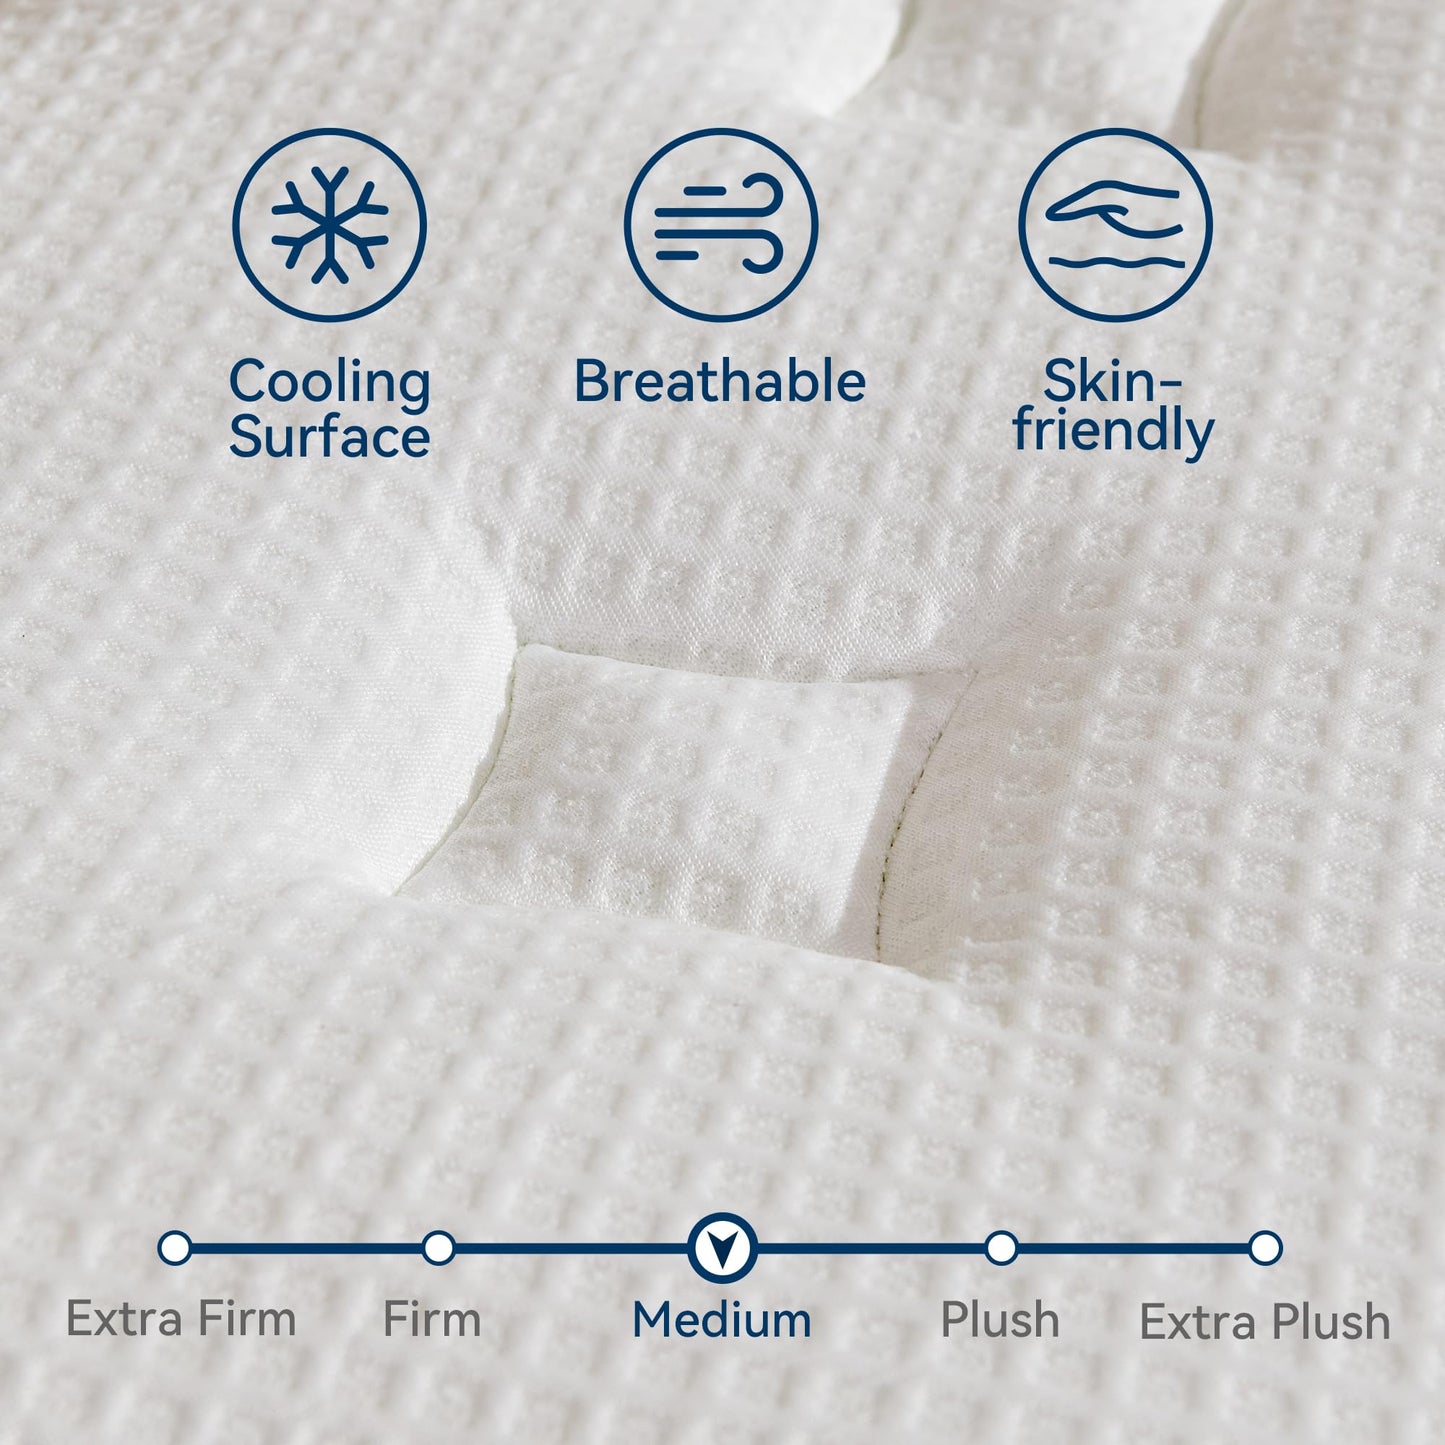 BDEUS Queen Mattress, 10 inch Gel Memory Foam Hybrid Mattress in a Box with 7-Zone Individual Pocket Spring for Cooling Sleep & Pressure Relief, Medium Firm Bed Mattresses